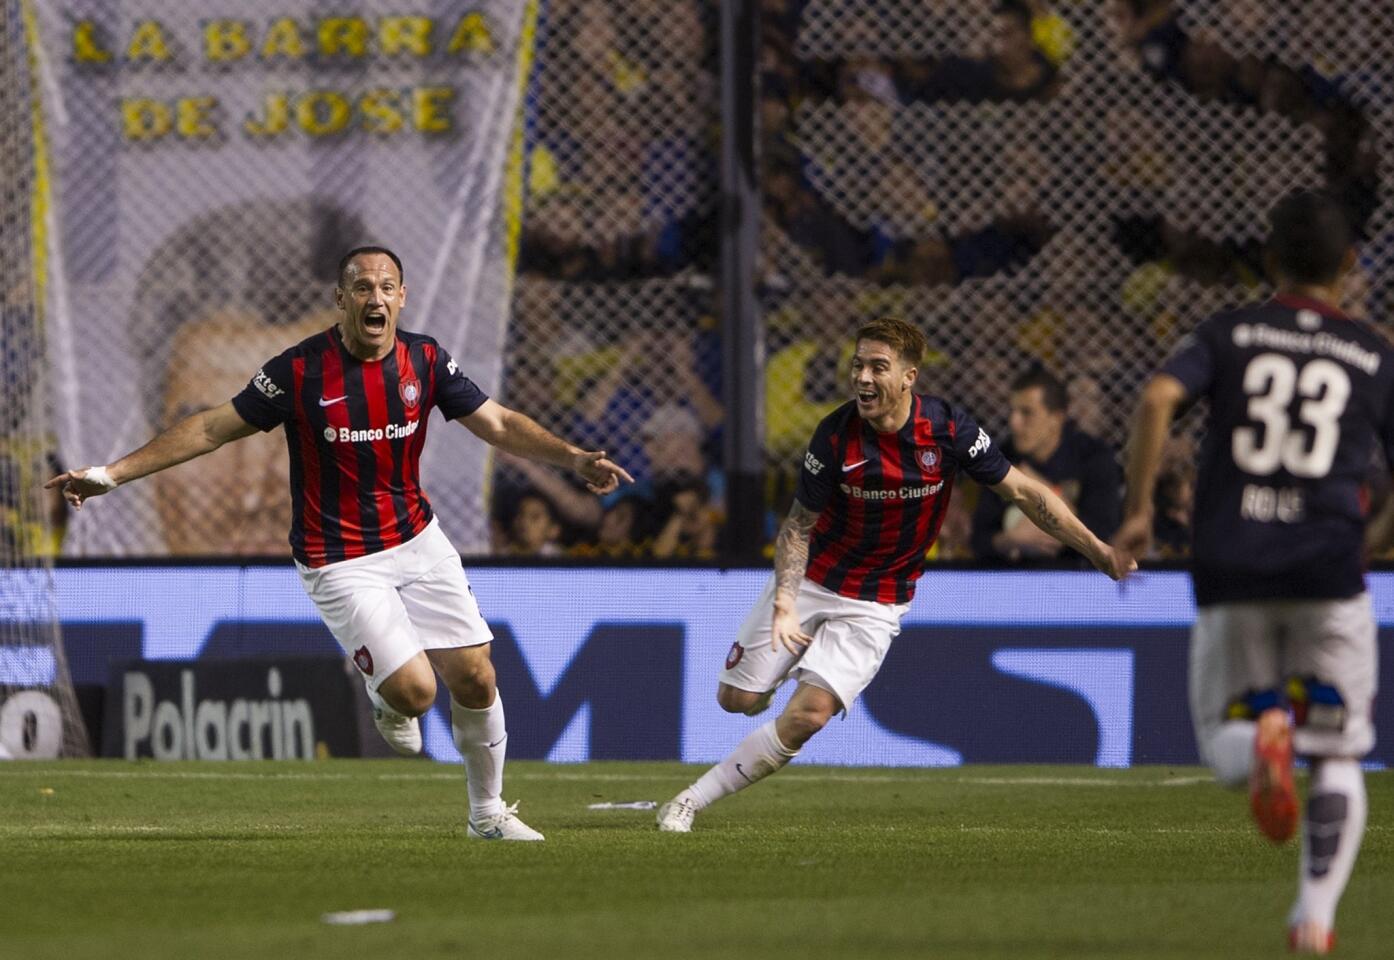 San Lorenzo's forward Mauro Matos (L) celebrates after scoring a goal against Boca Juniors during their Argentina First Division football match at La Bombonera stadium, in Buenos Aires, on September 6, 2015. AFP PHOTO / ALEJANDRO PAGNIALEJANDRO PAGNI/AFP/Getty Images ** OUTS - ELSENT, FPG - OUTS * NM, PH, VA if sourced by CT, LA or MoD **